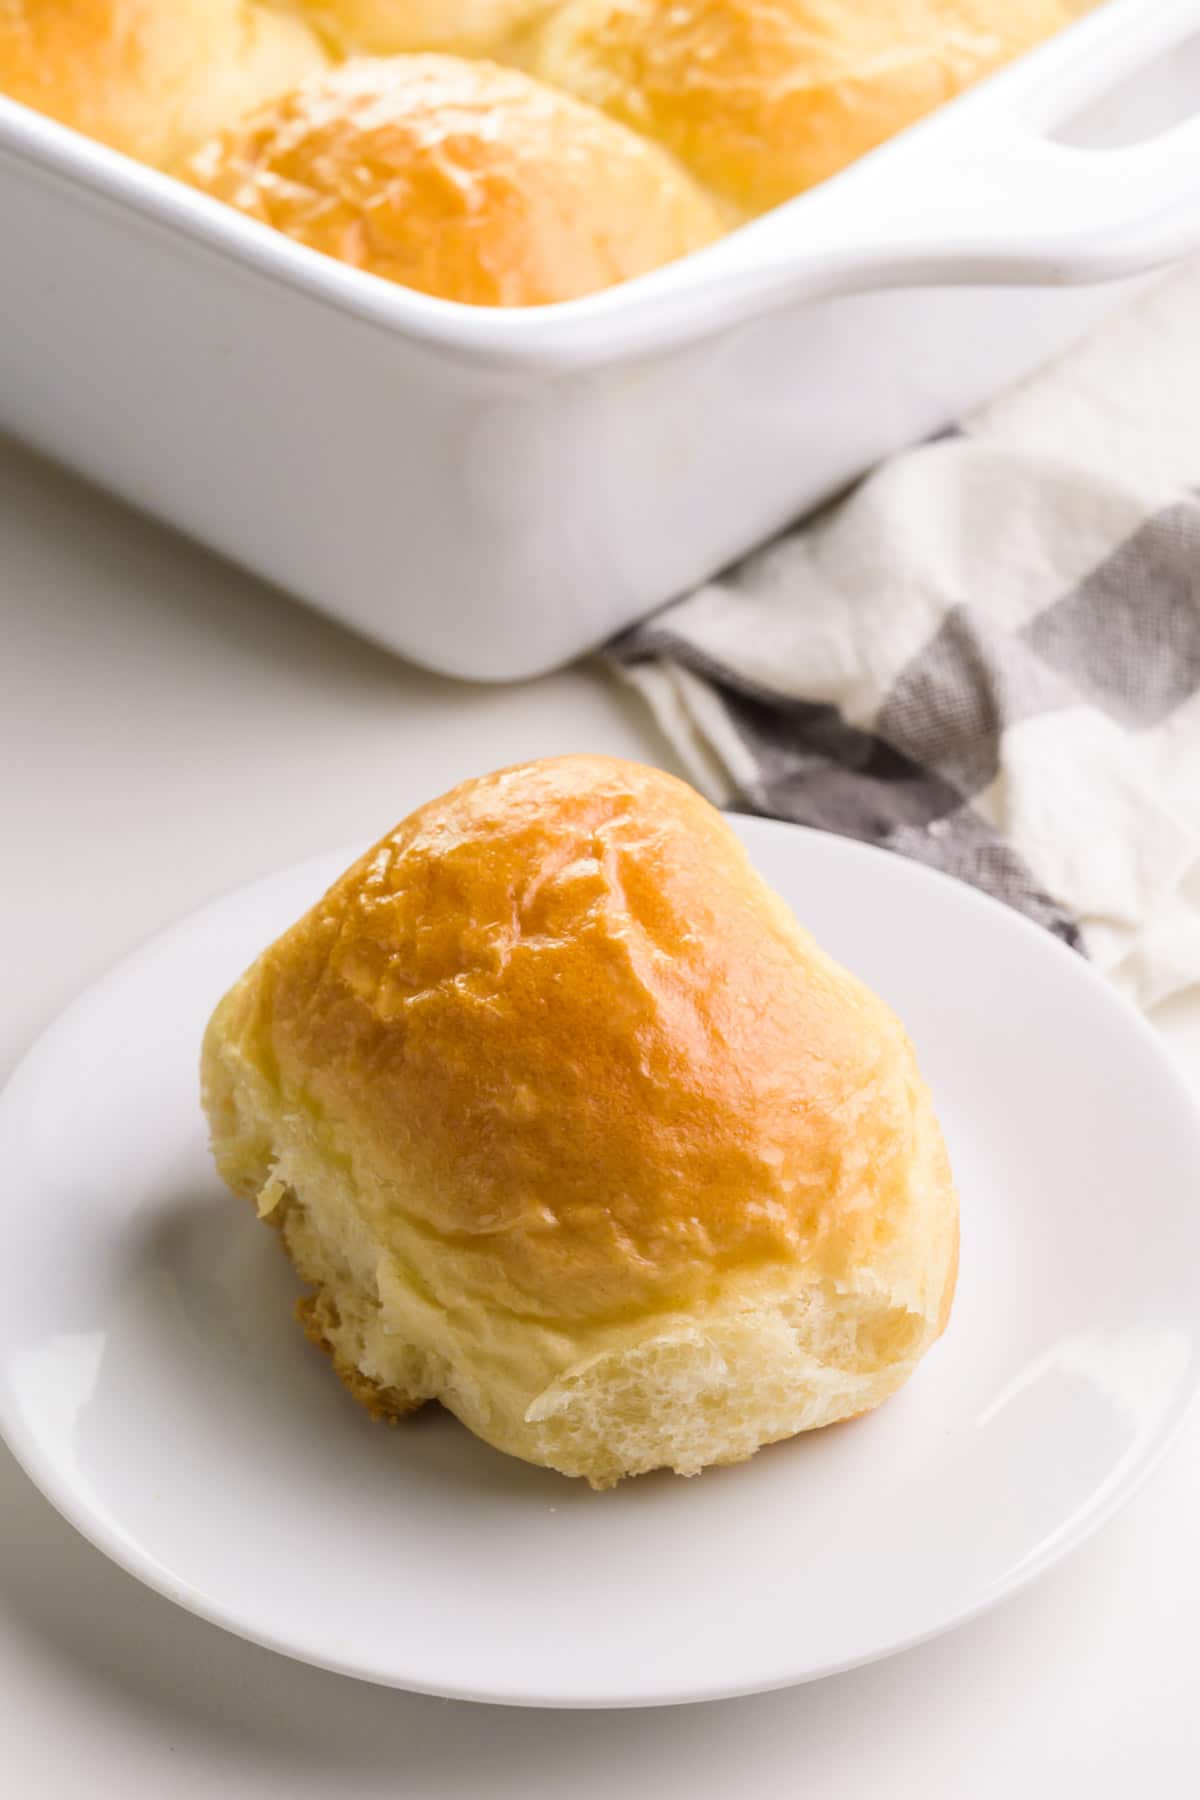 A vegan yeast roll sits on a plate in front of a pan with more rolls.